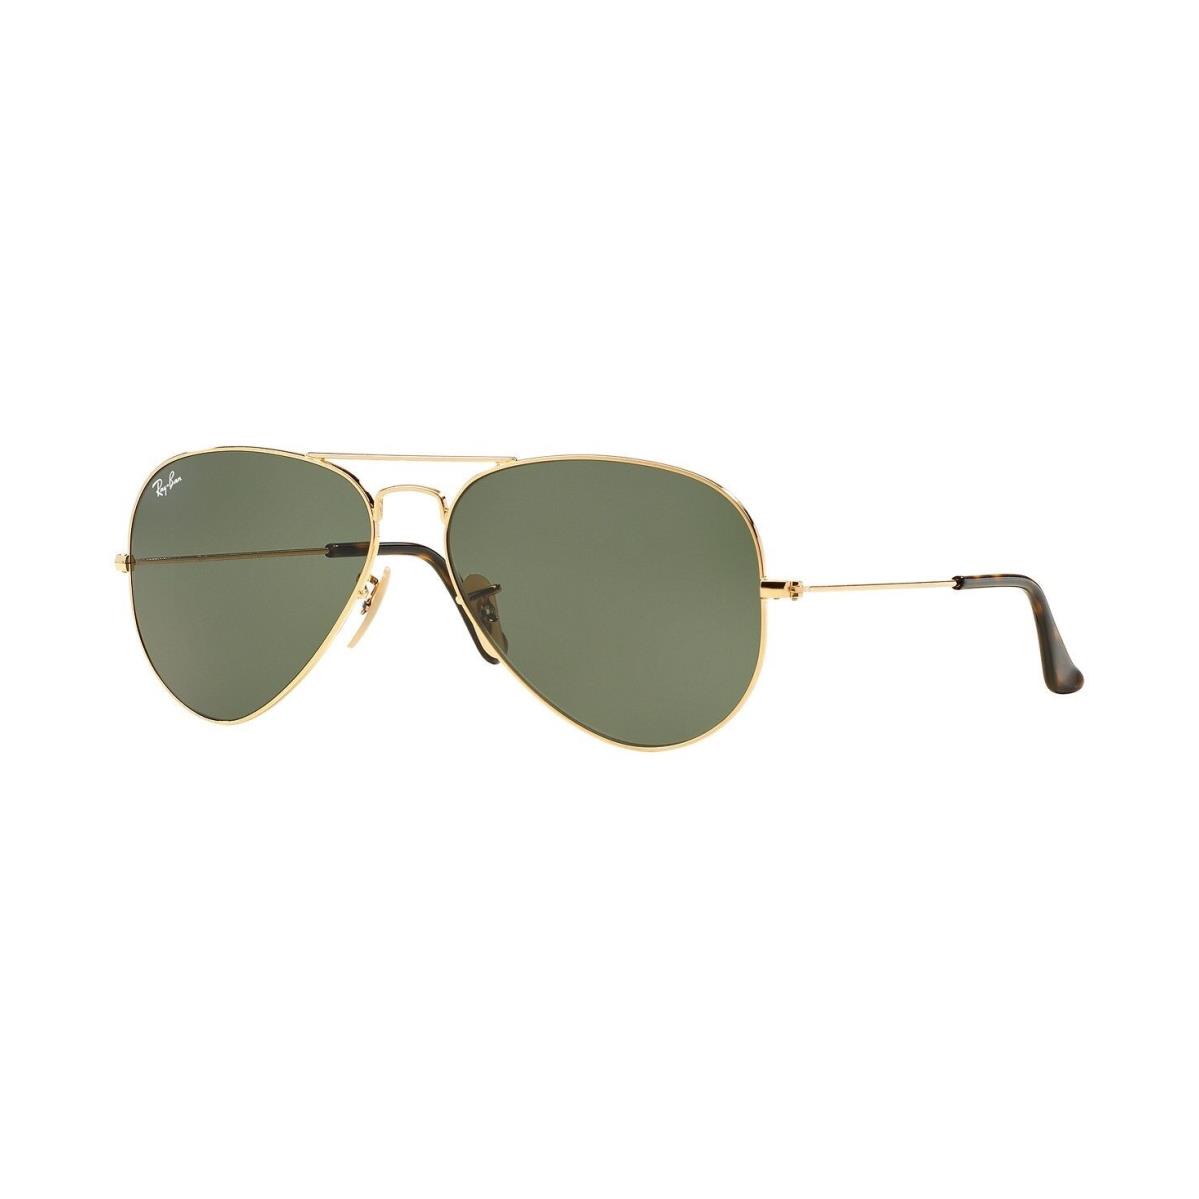 Ray Ban Sunglasses Outdoor Fashion Aviator RB3025 181 Gold F Green Lens